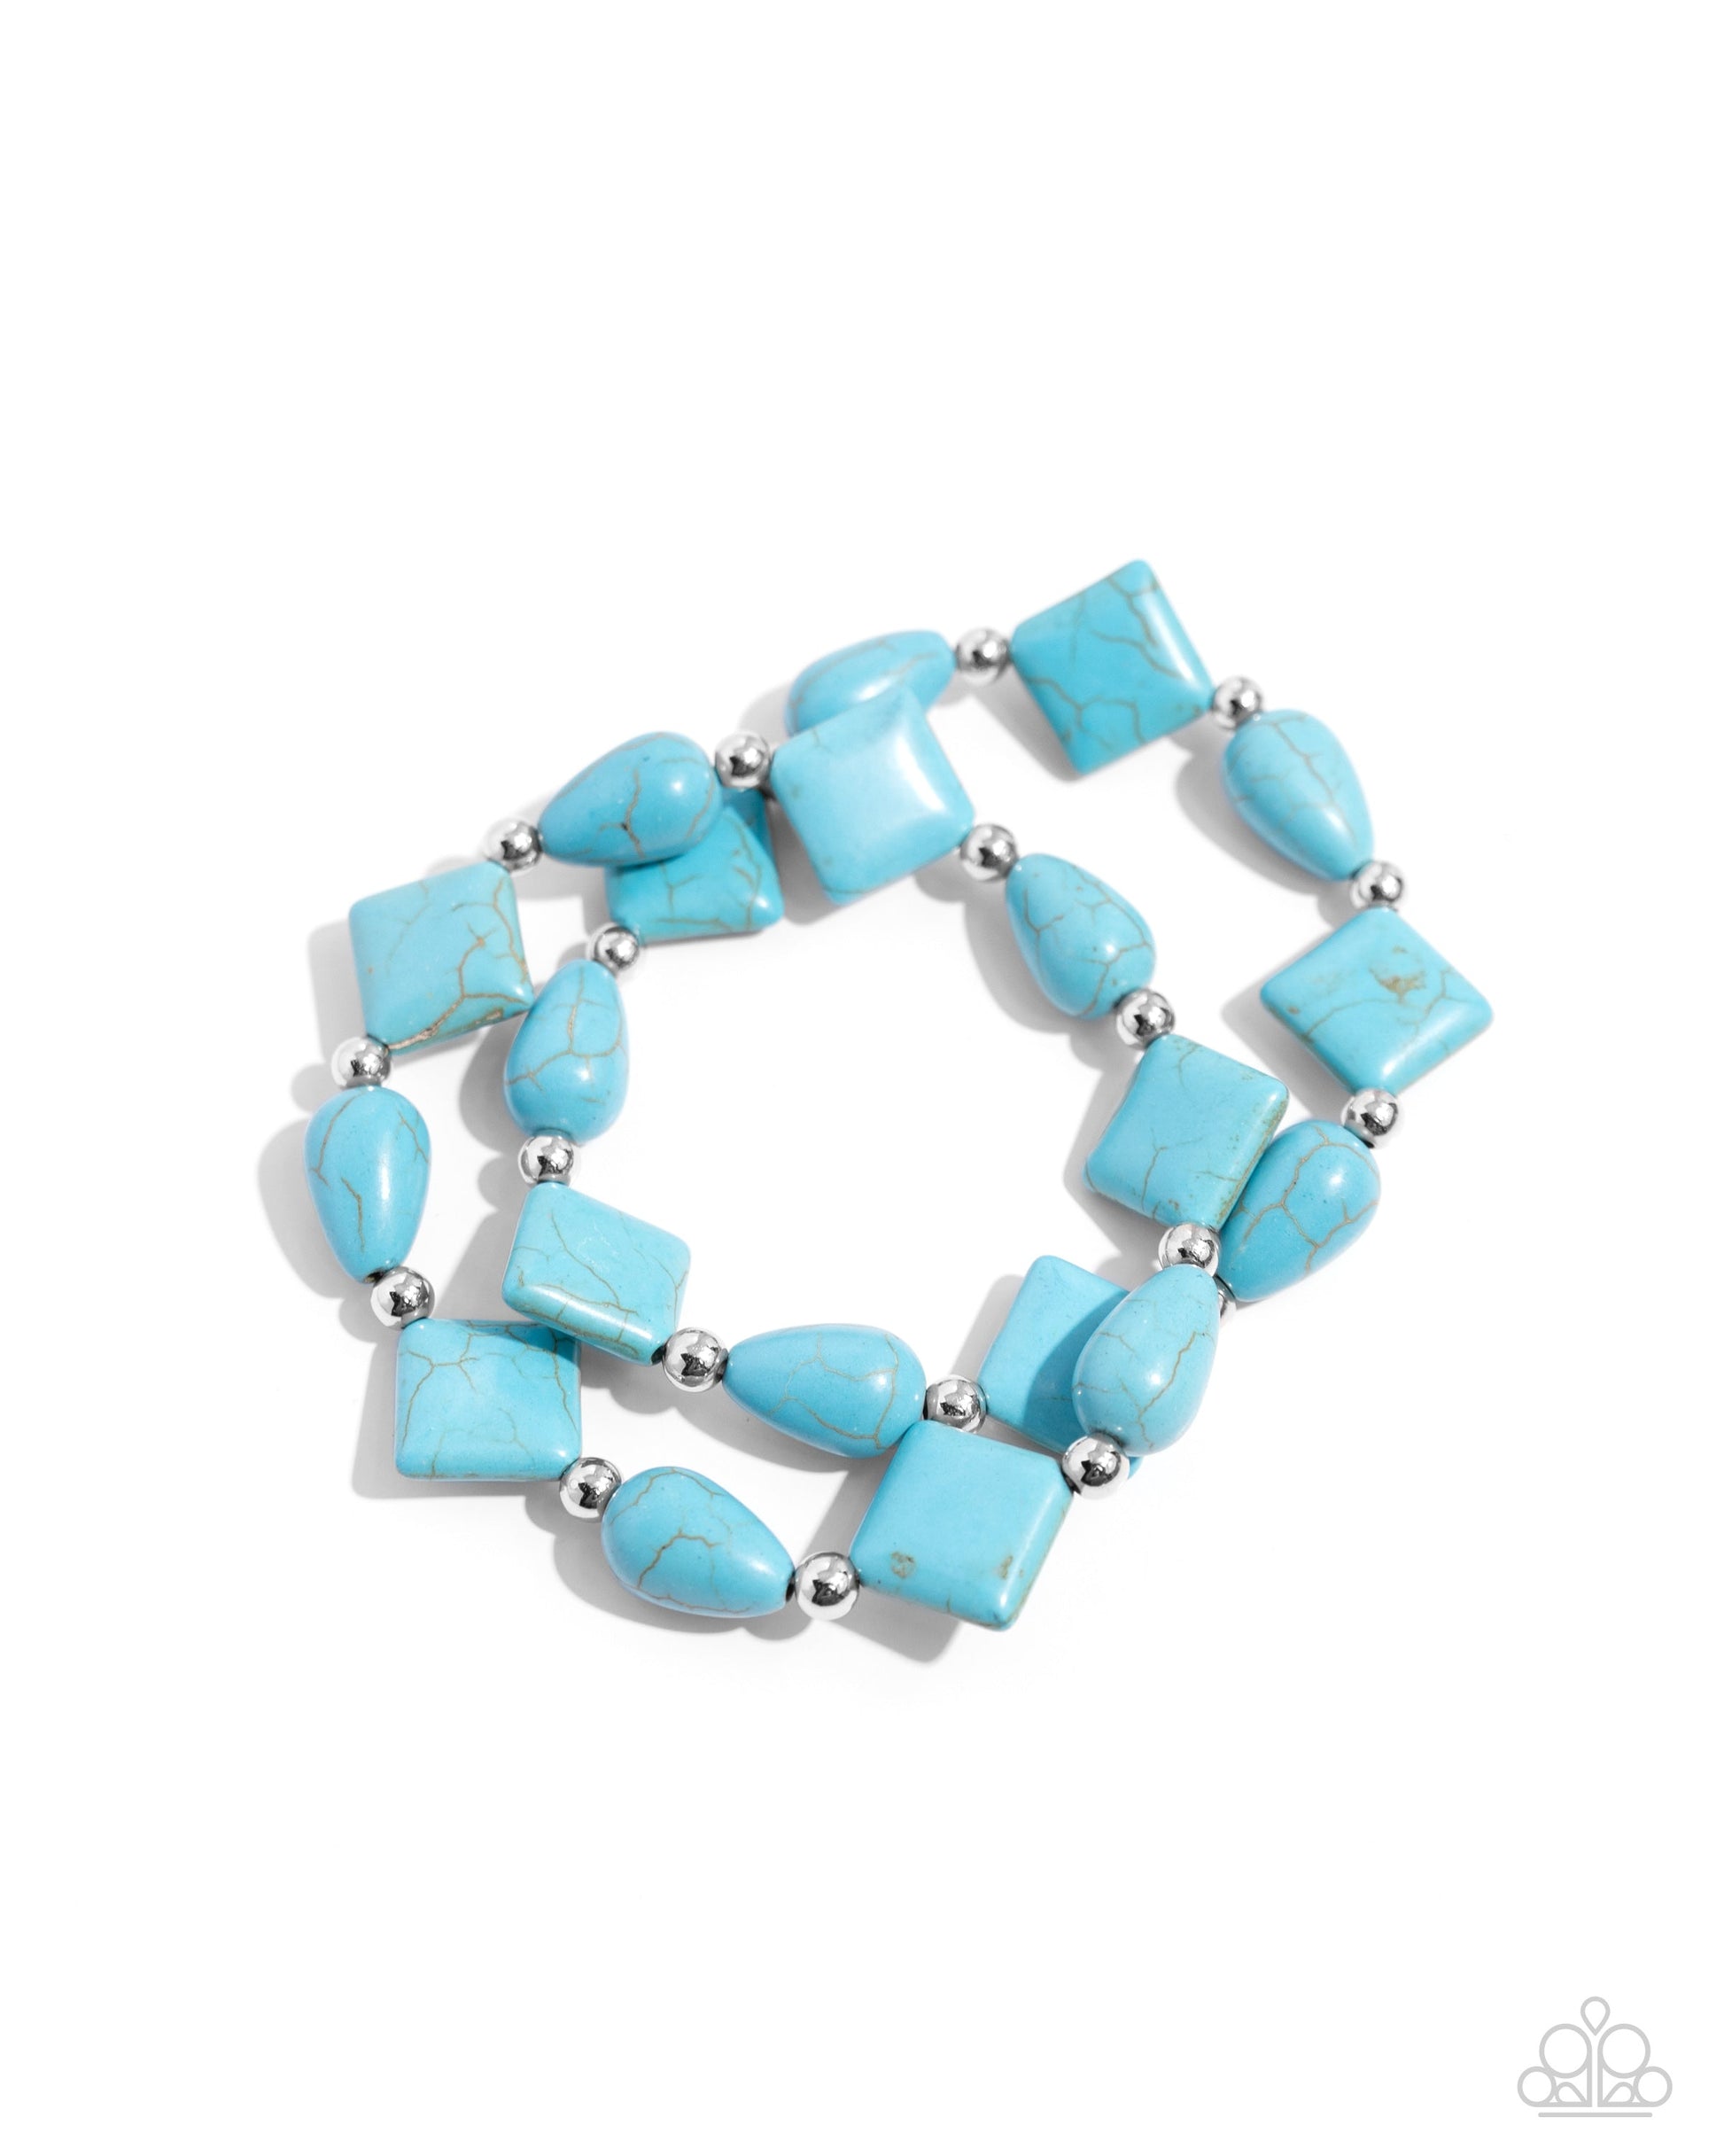 EARTHY Riser - Blue Turquoise Bracelet - Paparazzi Accessories - Infused along elastic stretchy bands, turquoise stones in various shapes and silver beads alternate along the wrist for an earthy centerpiece. Sold as one set of two bracelets.